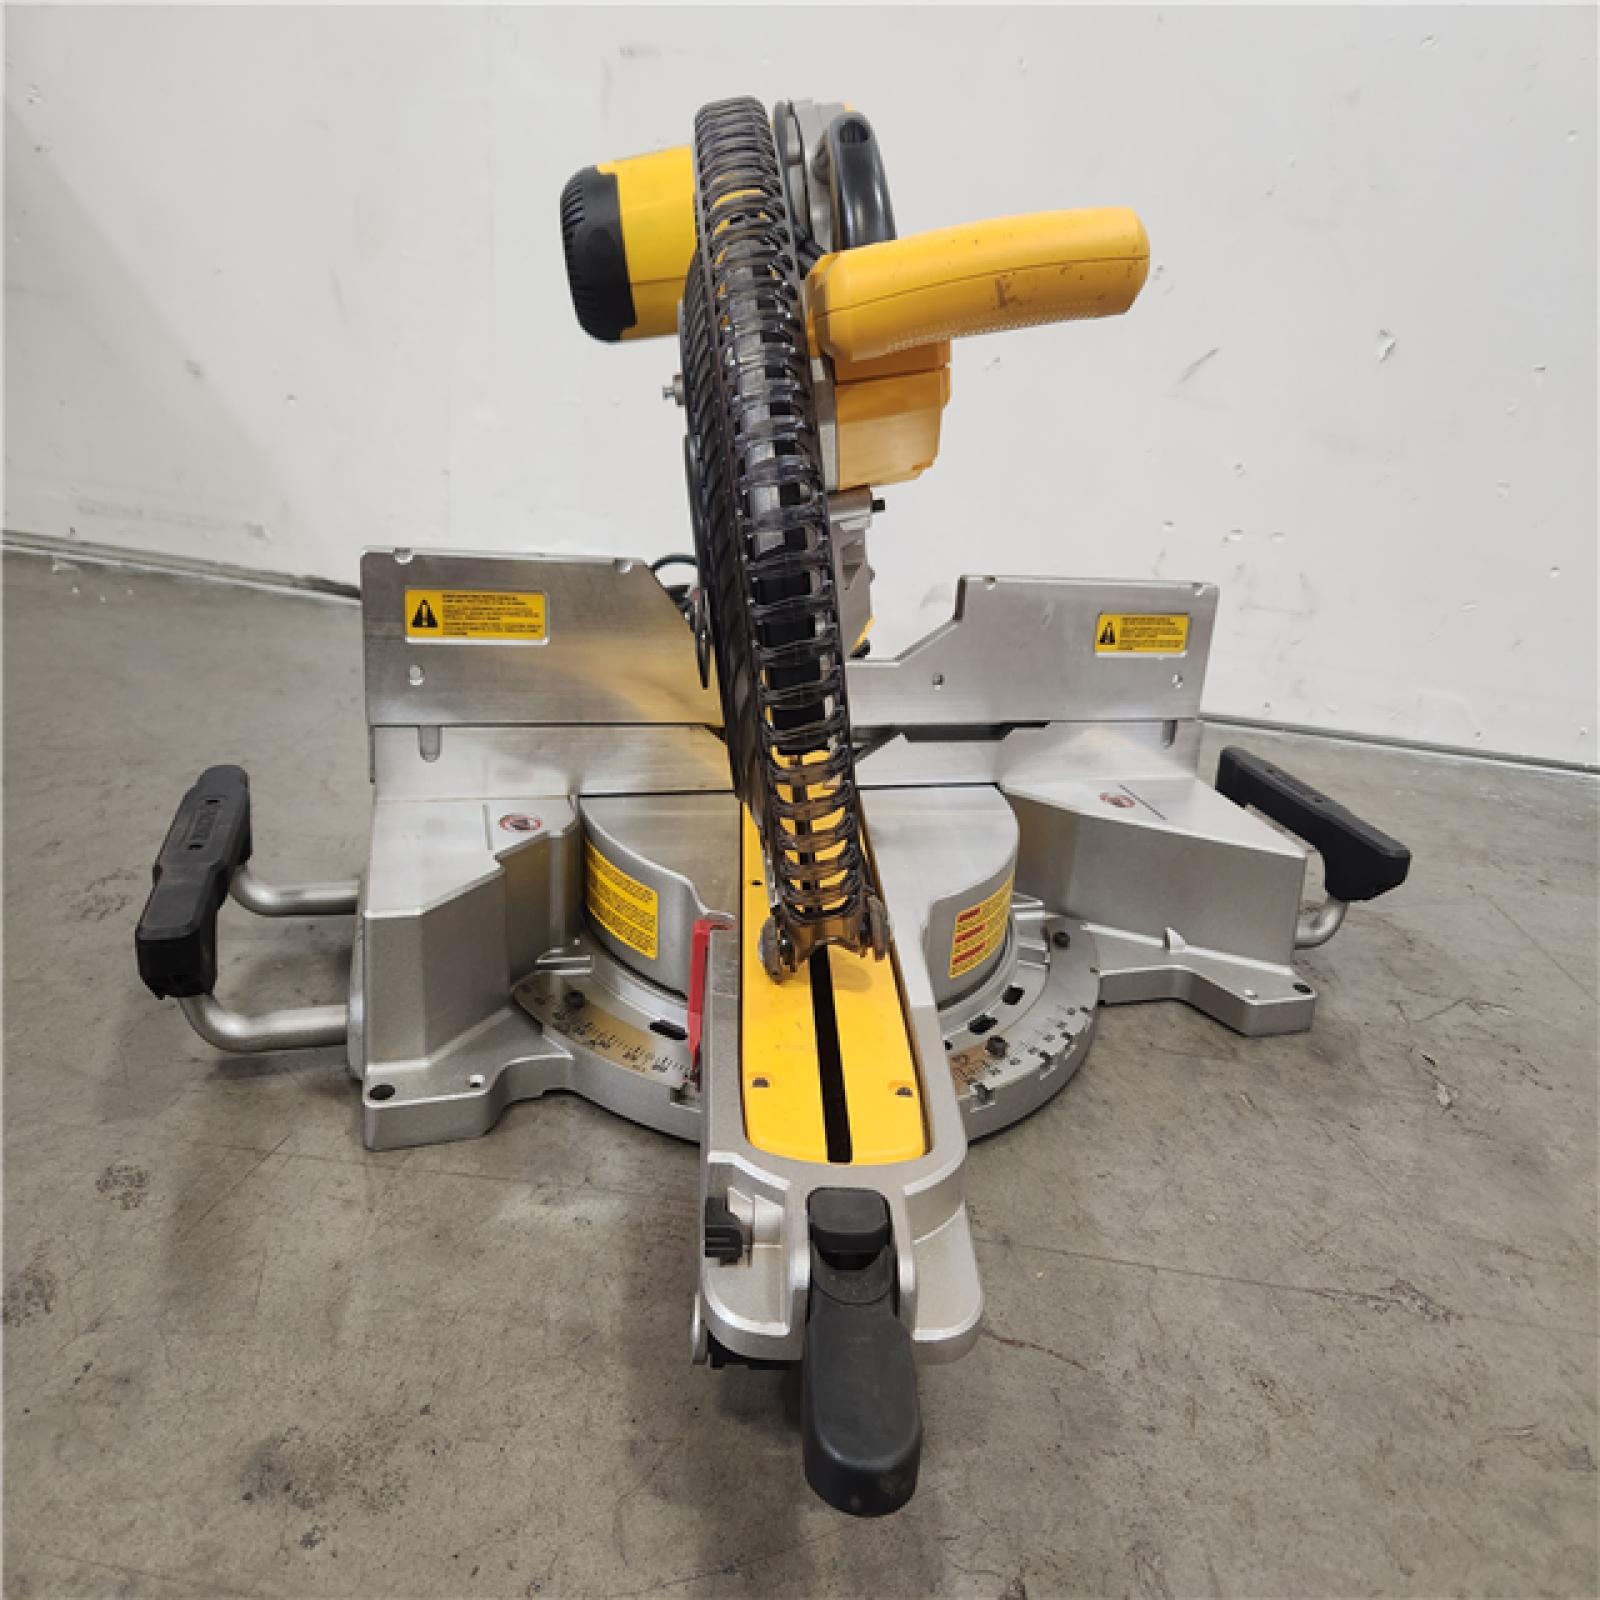 Phoenix Location DEWALT 15 Amp Corded 12 in. Double Bevel Sliding Compound Miter Saw, Blade Wrench and Material Clamp DWS779